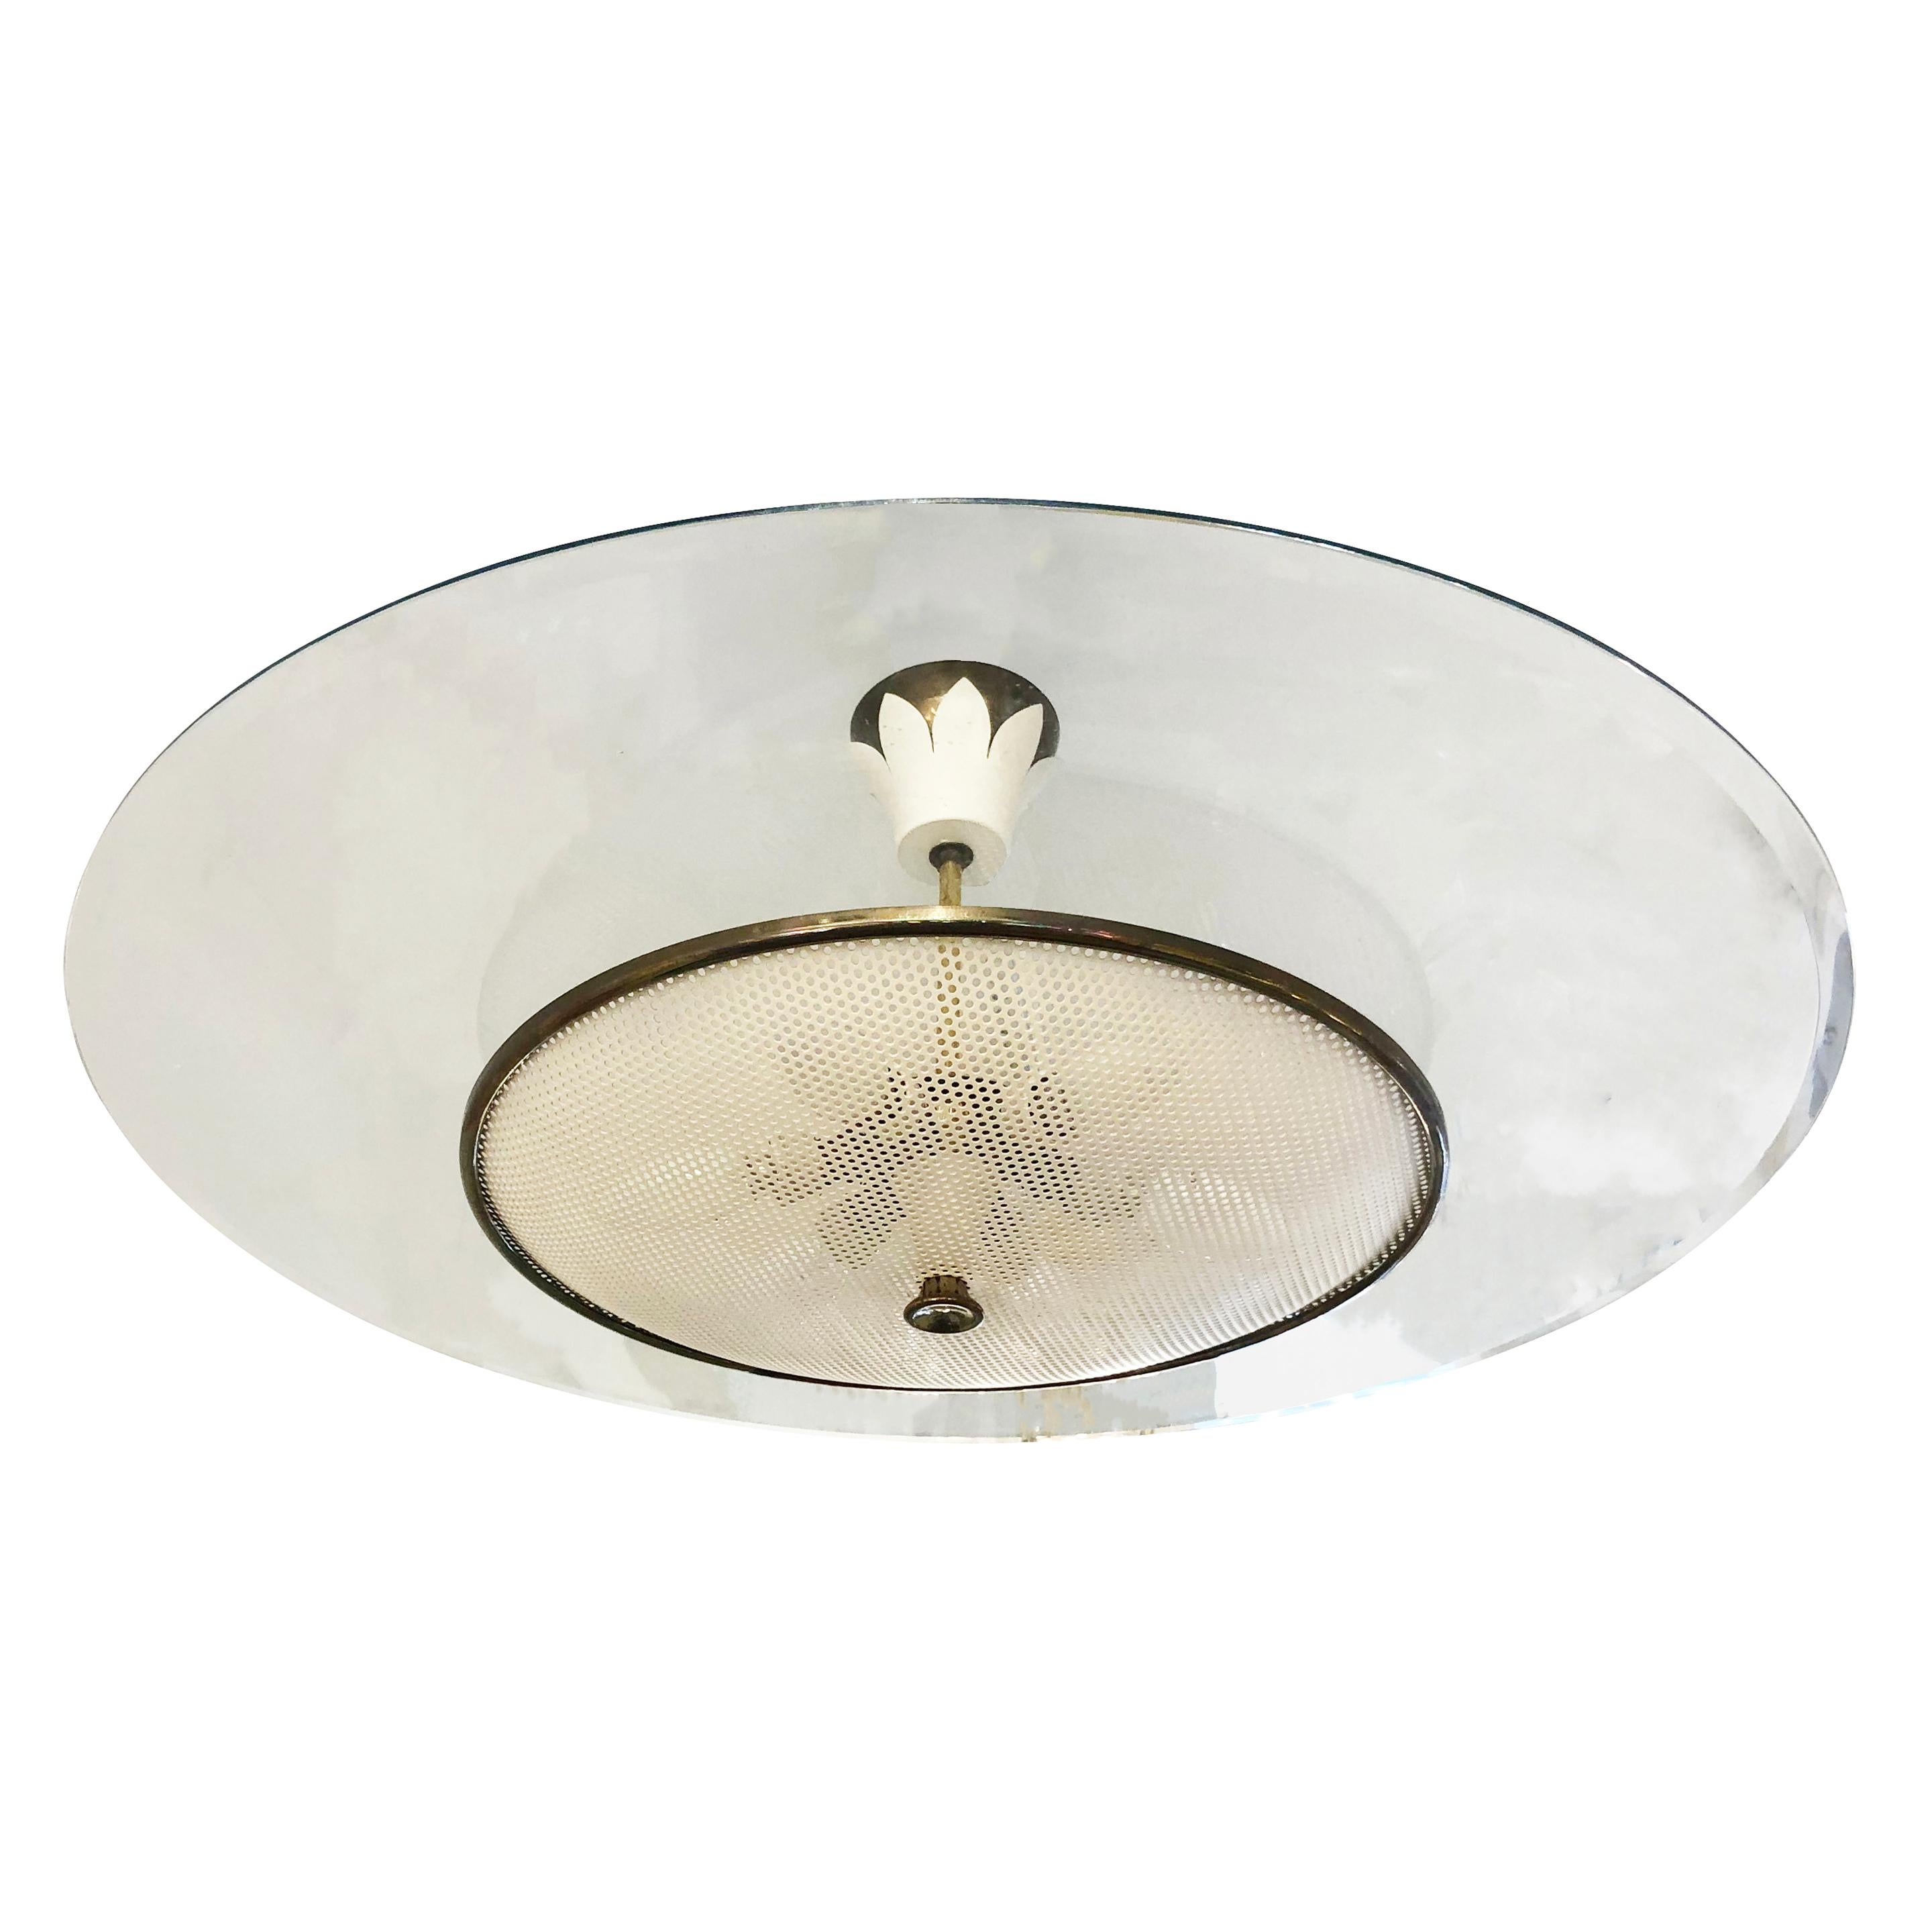 1940s chandelier attributed to Pietro Chiesa who was the artistic director of Fontana Arte at the time. Features a clear flat glass with beveled edges over a perforated shade. Brass and white lacquered details. The decorative canopy is a Classic